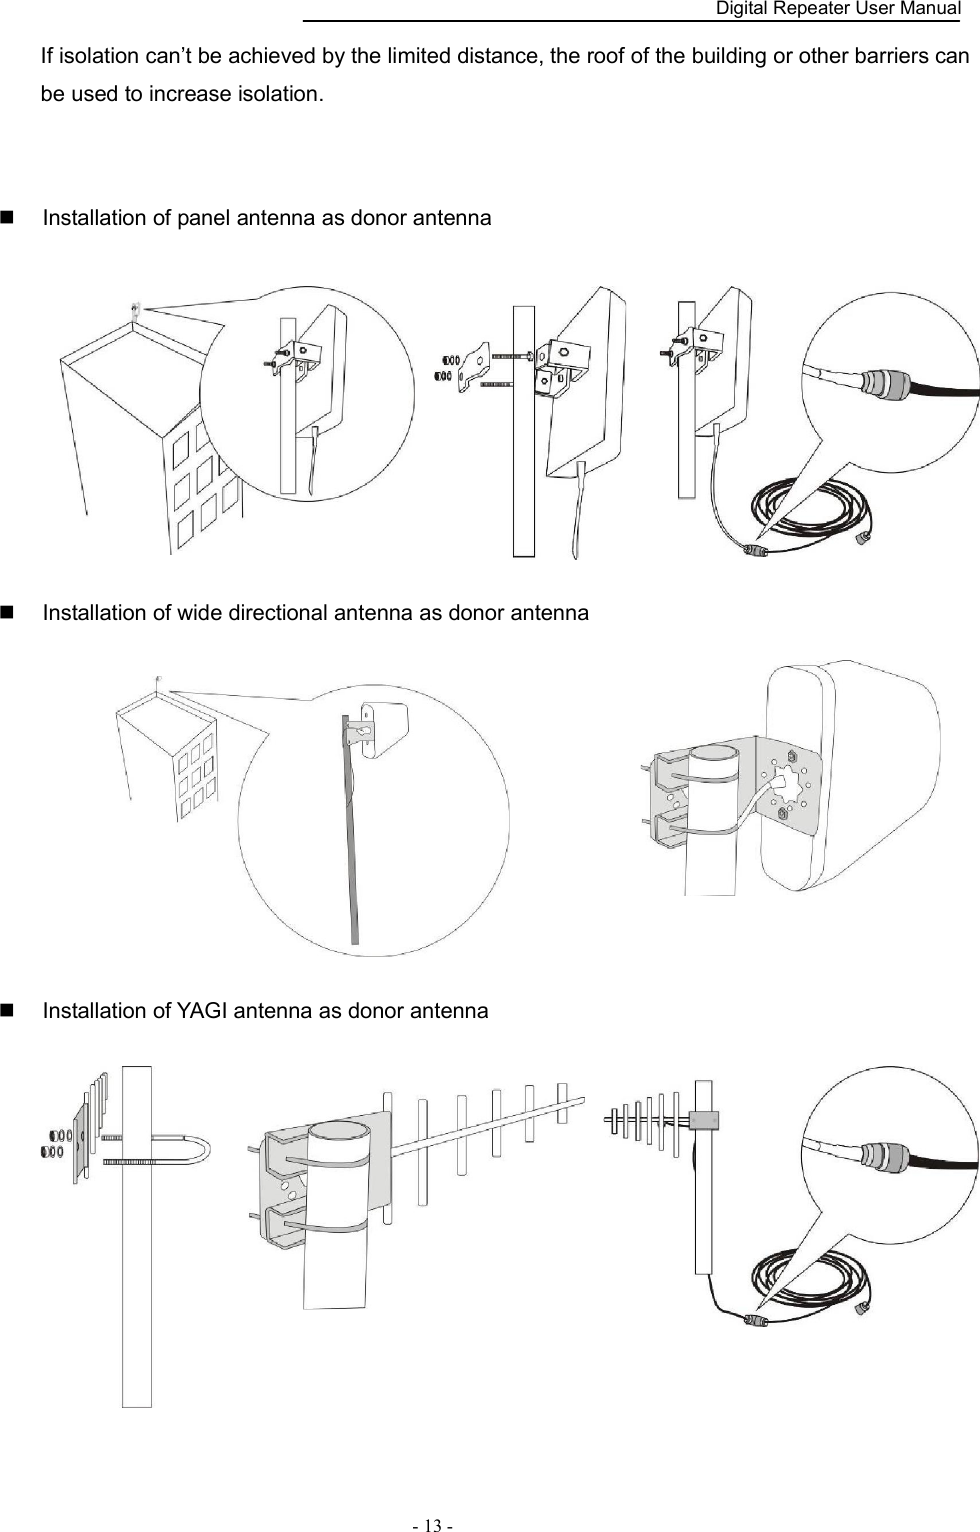    Digital Repeater User Manual  - 13 -   If isolation can’t be achieved by the limited distance, the roof of the building or other barriers can be used to increase isolation.       Installation of panel antenna as donor antenna                Installation of wide directional antenna as donor antenna              Installation of YAGI antenna as donor antenna             